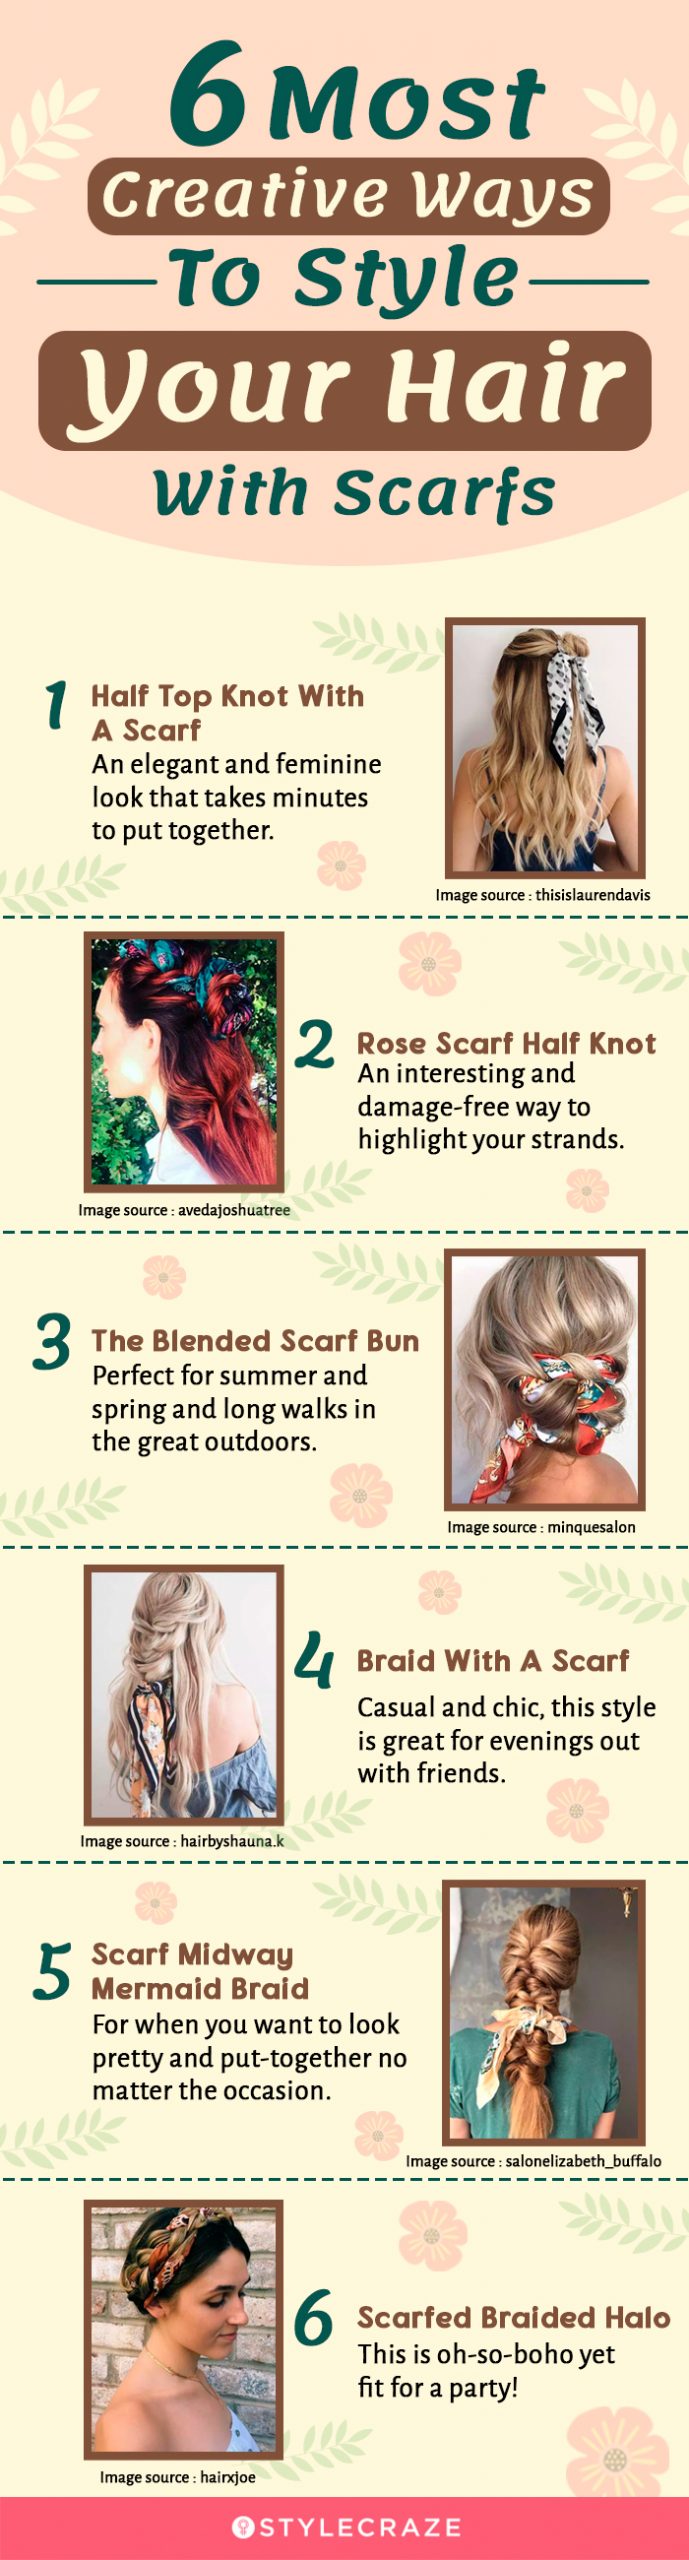 6 most creative ways to style your hair with scarfs [infographic]